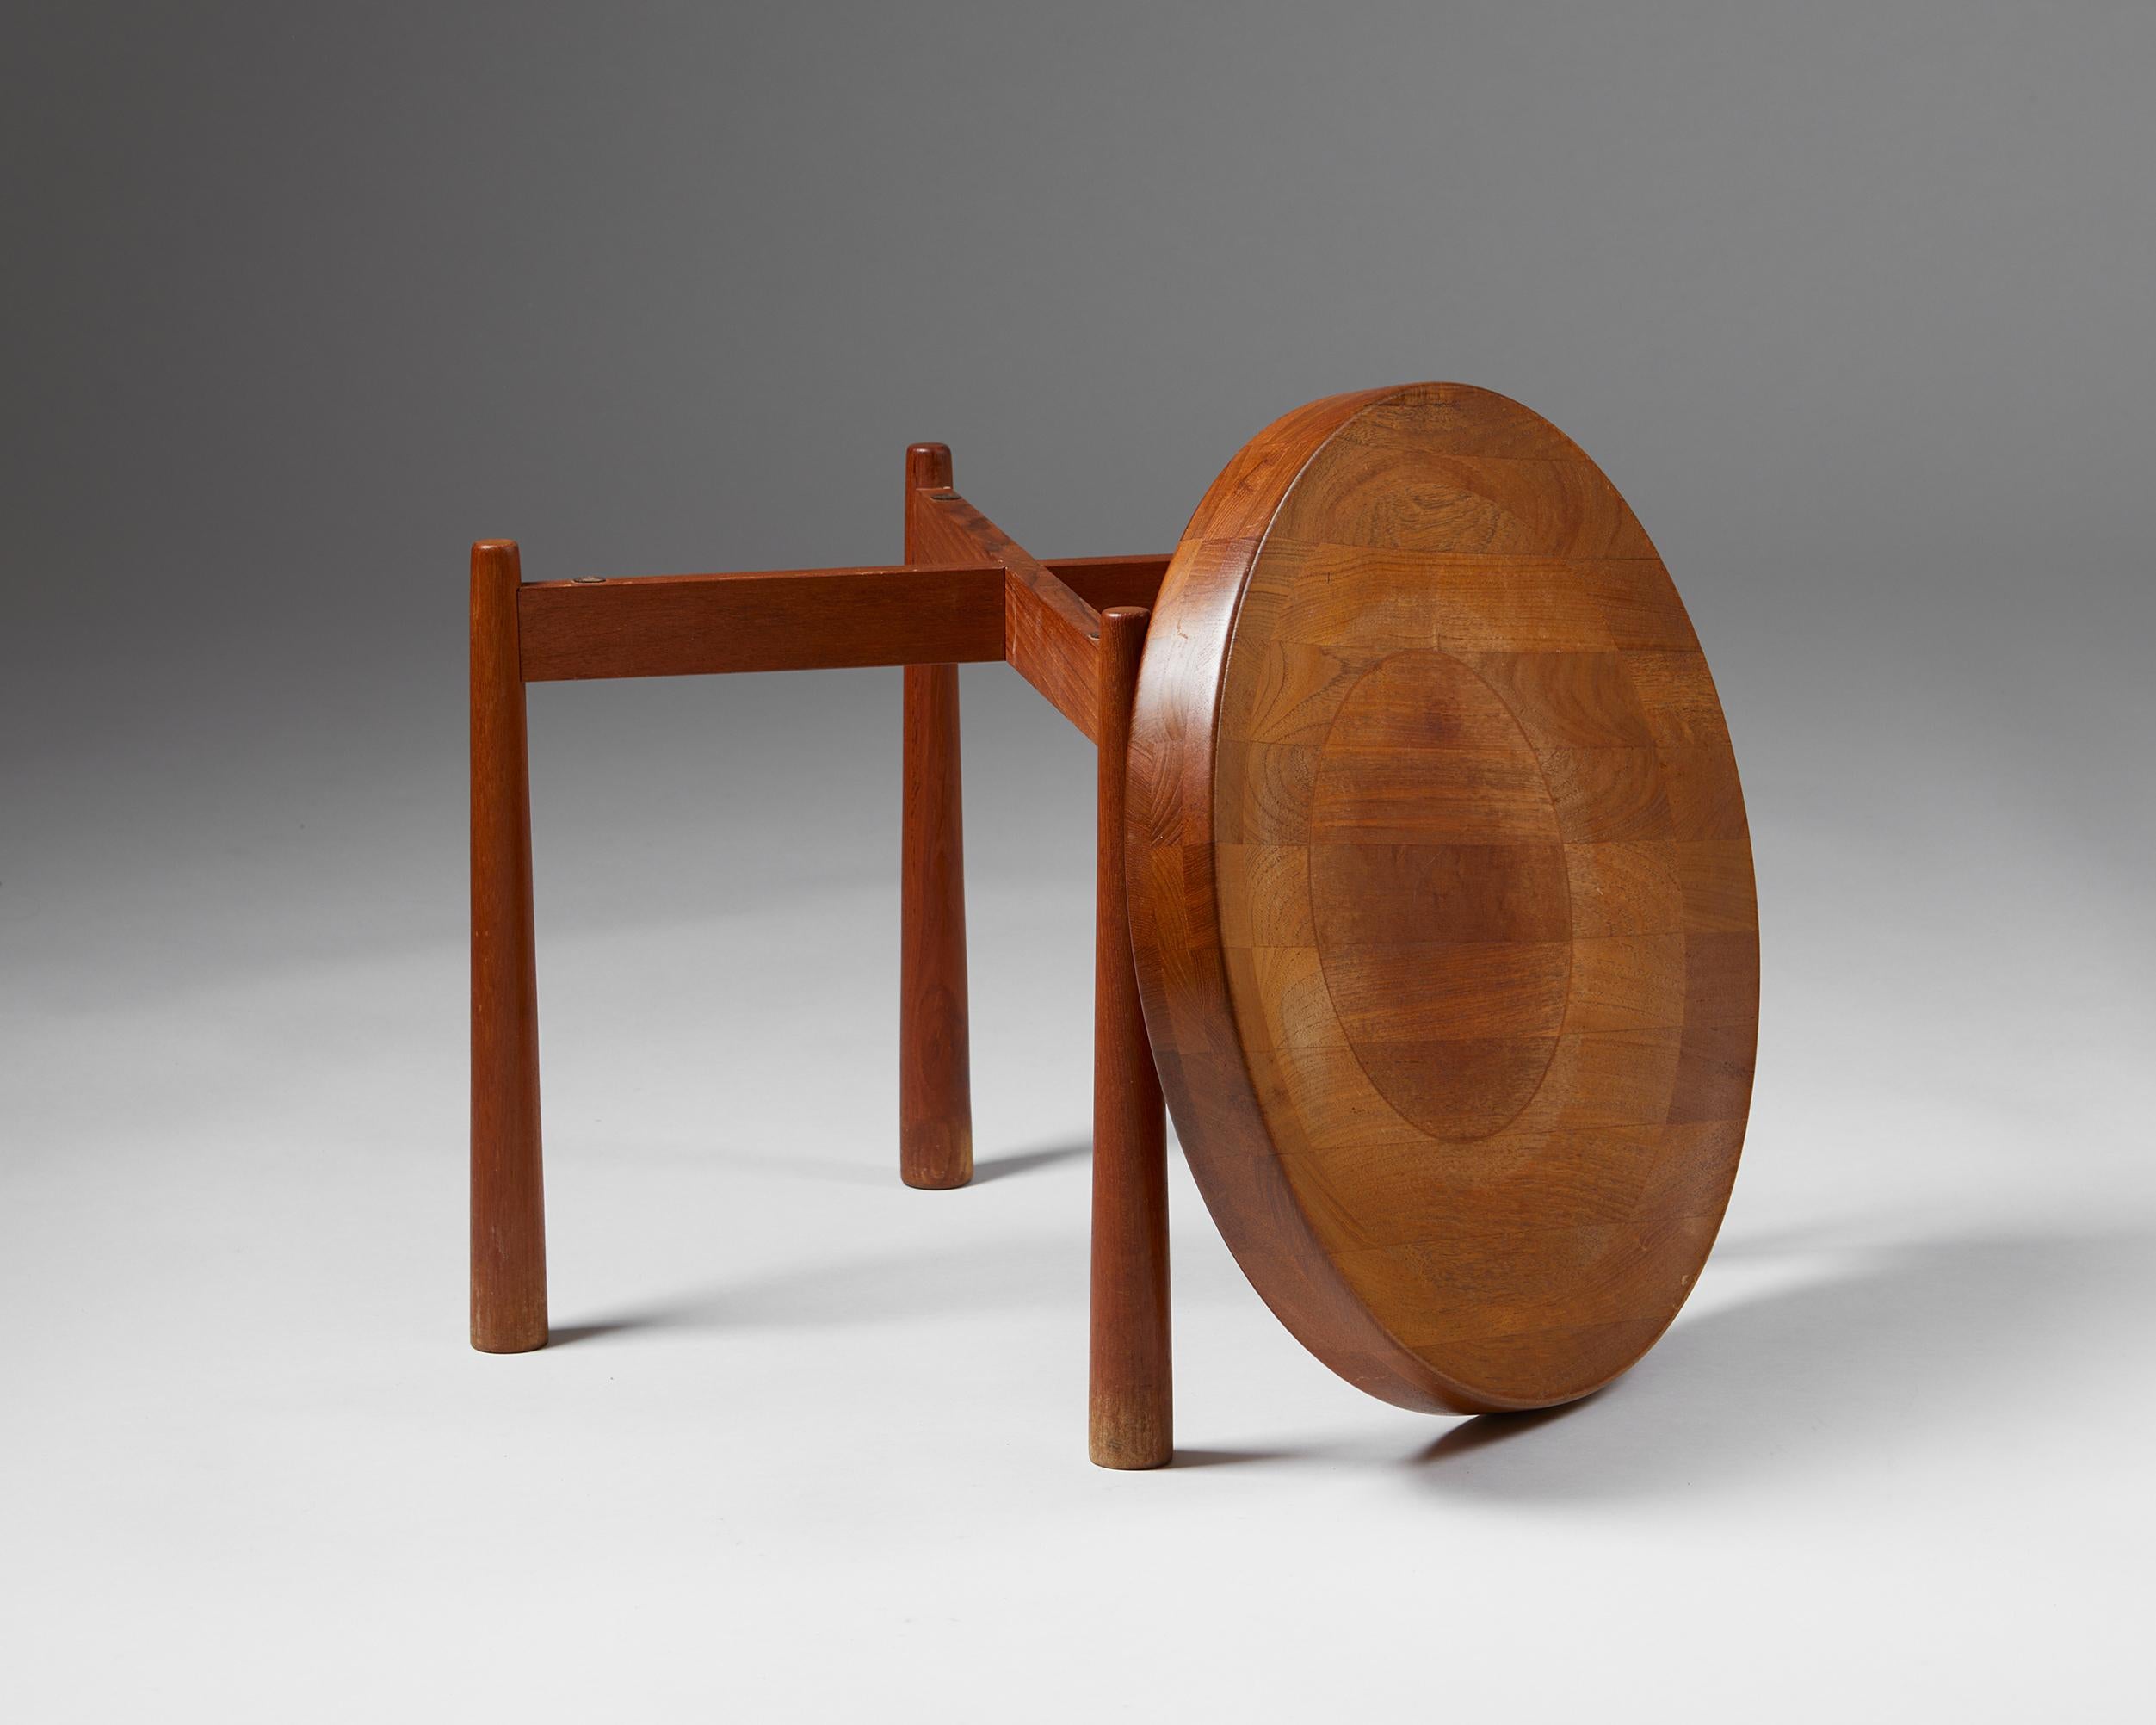 20th Century Teak Side Table Designed by Jens Harald Quistgaard, Denmark, 1950s For Sale